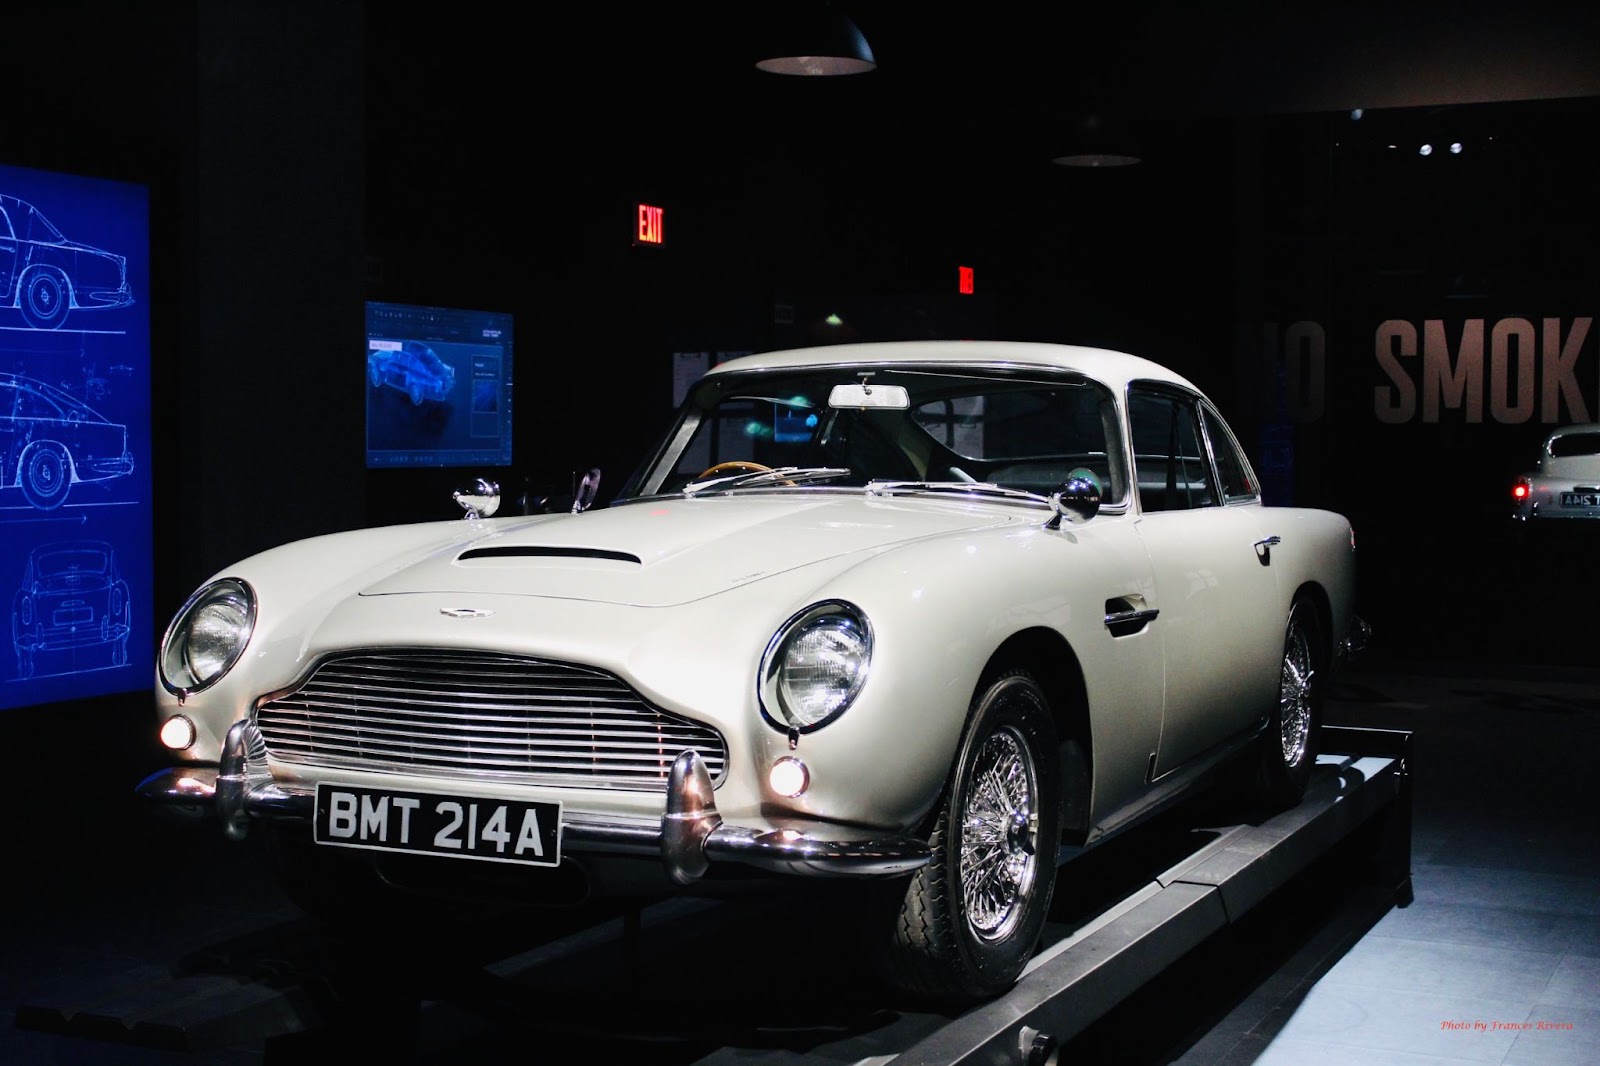 The GoldenEye DB5 at SPYSCAPE HQ in New York